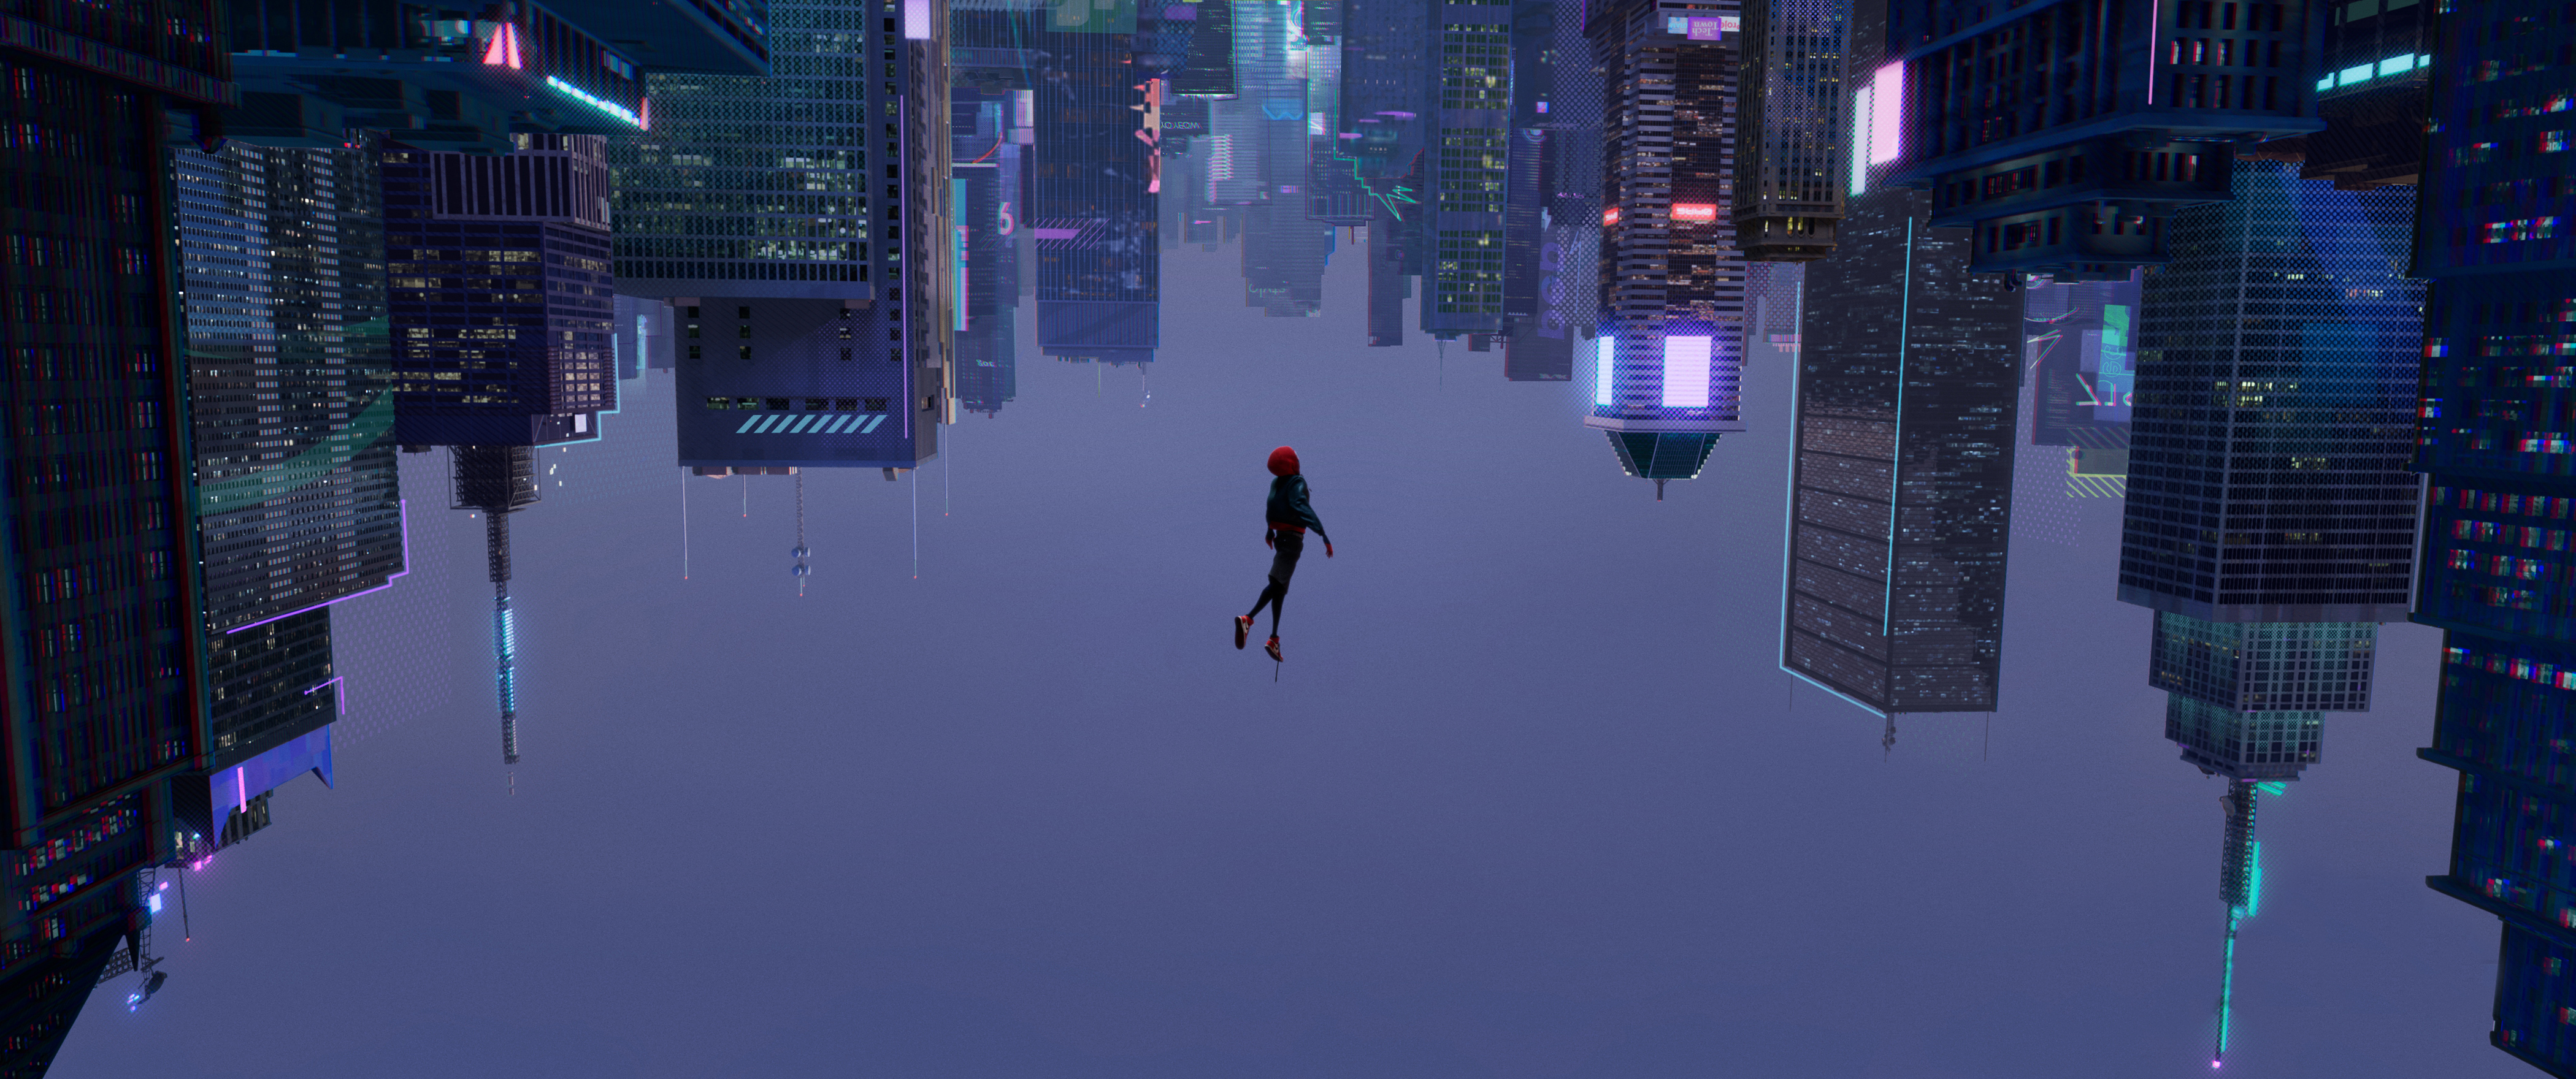 SpiderMan Into The Spider Verse 2018 Wallpaper, HD Movies 4K Wallpapers